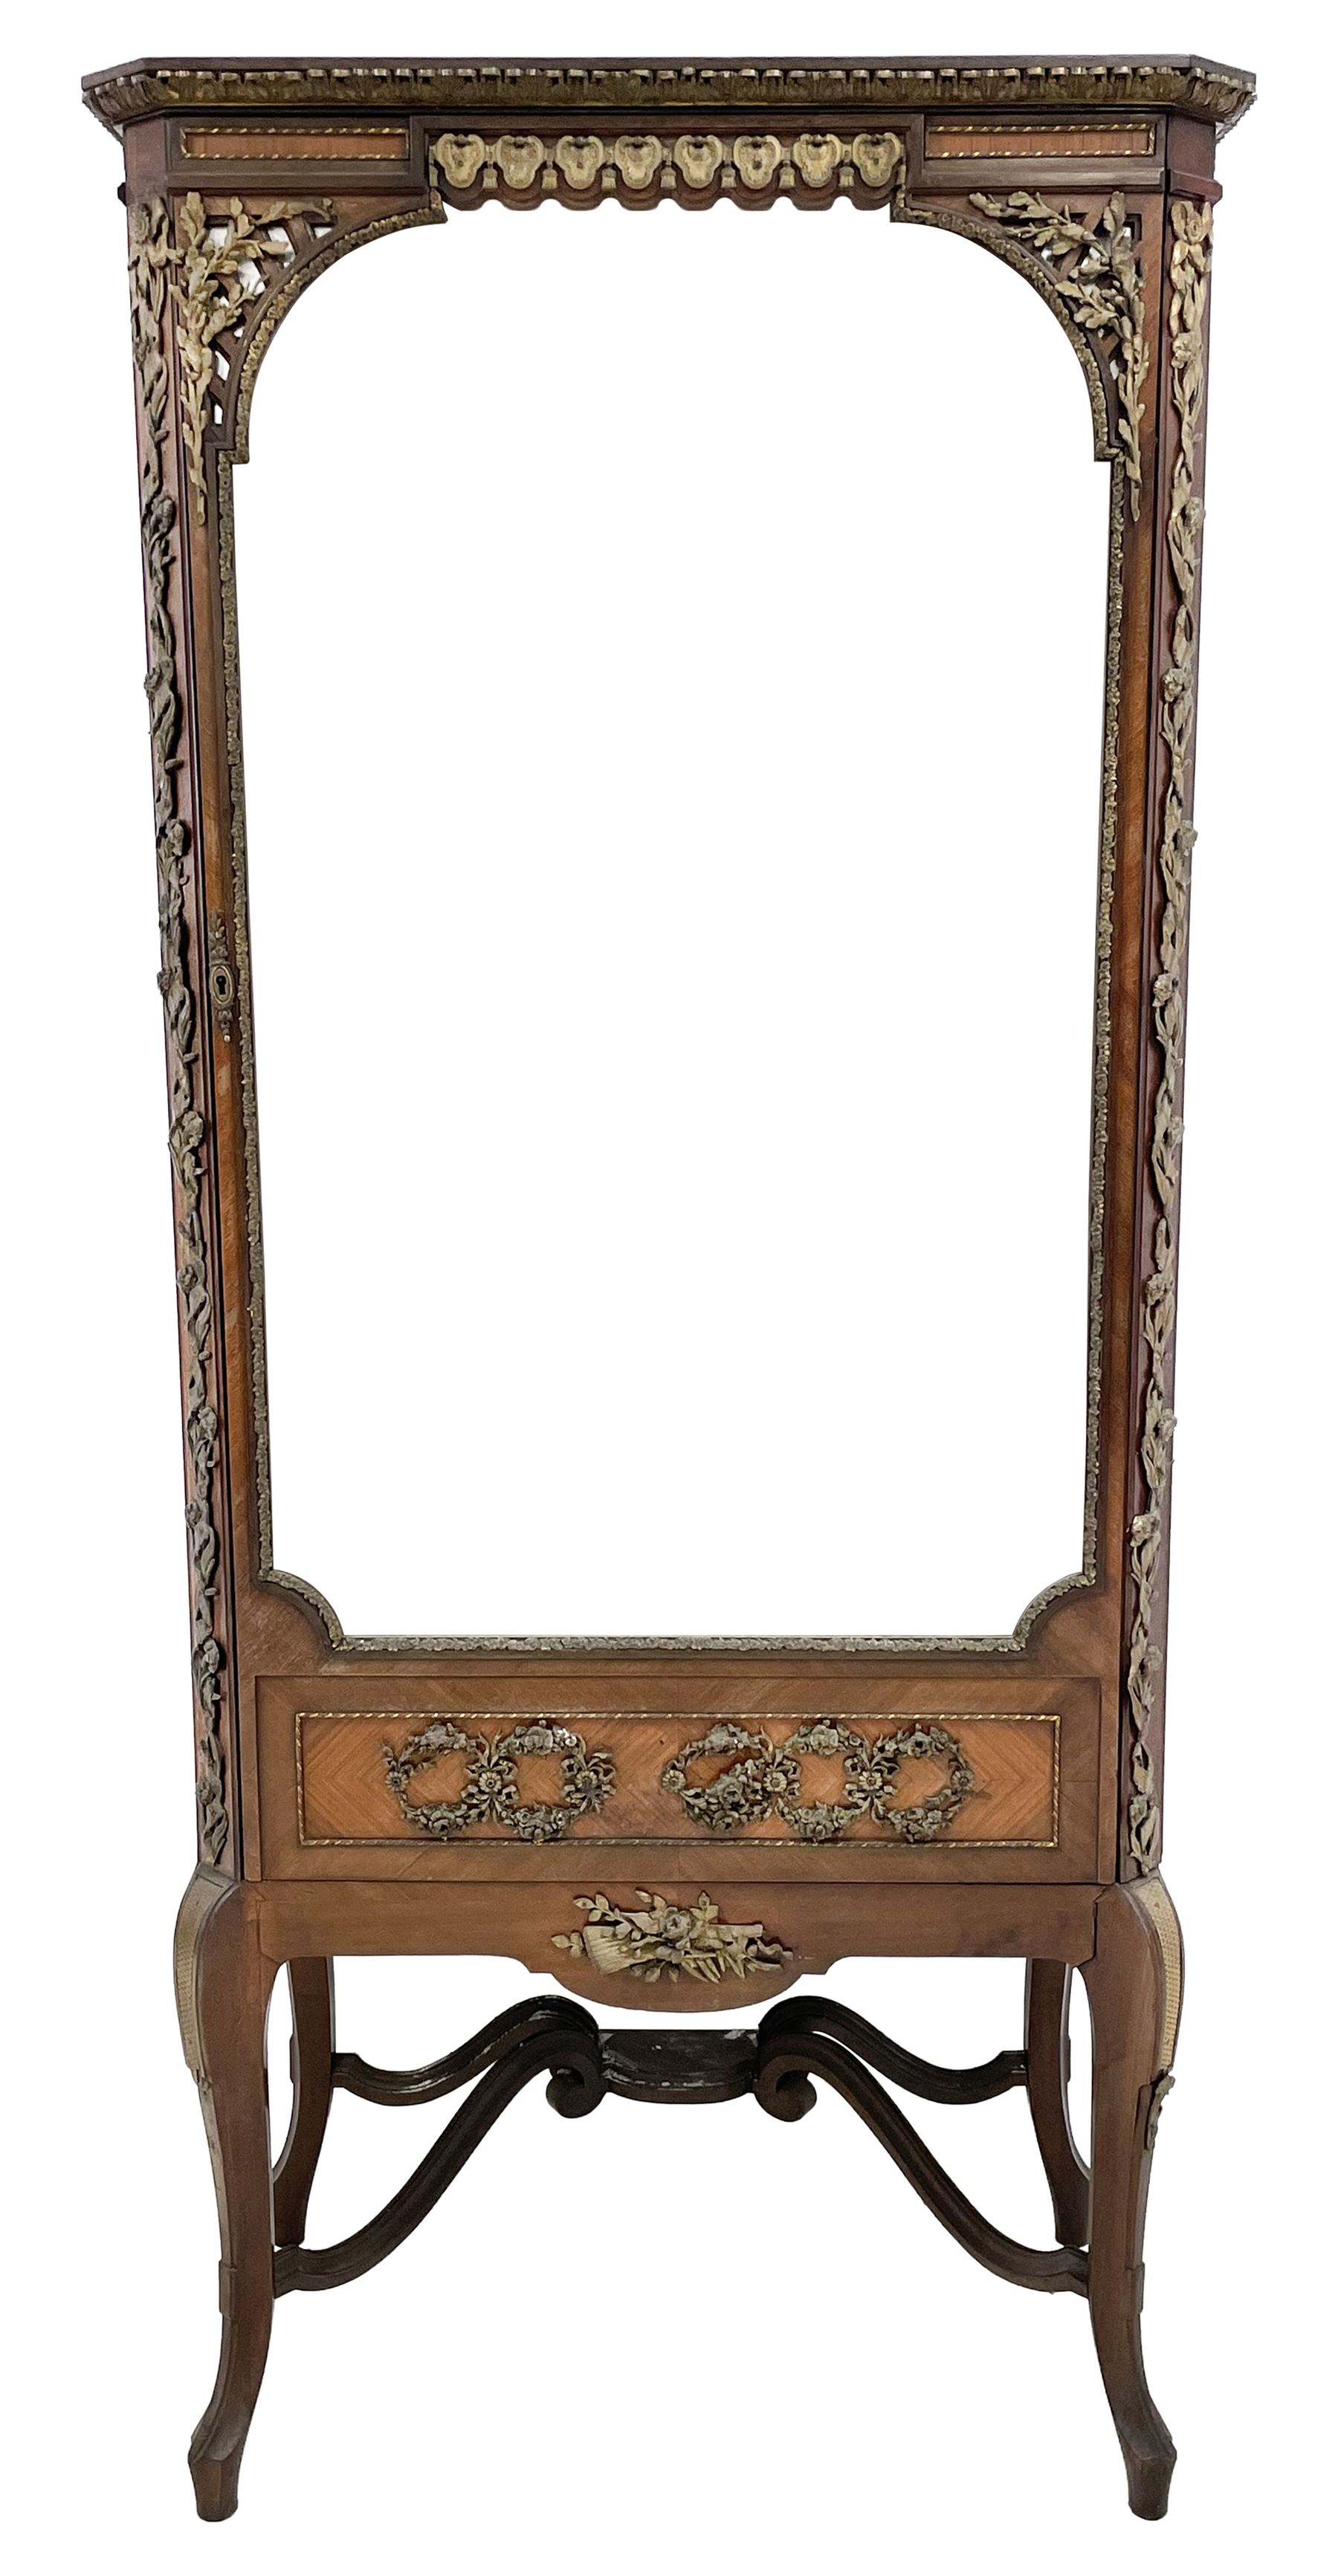 Late 19th/early 20th century French walnut and Kingwood vitrine or display cabinet